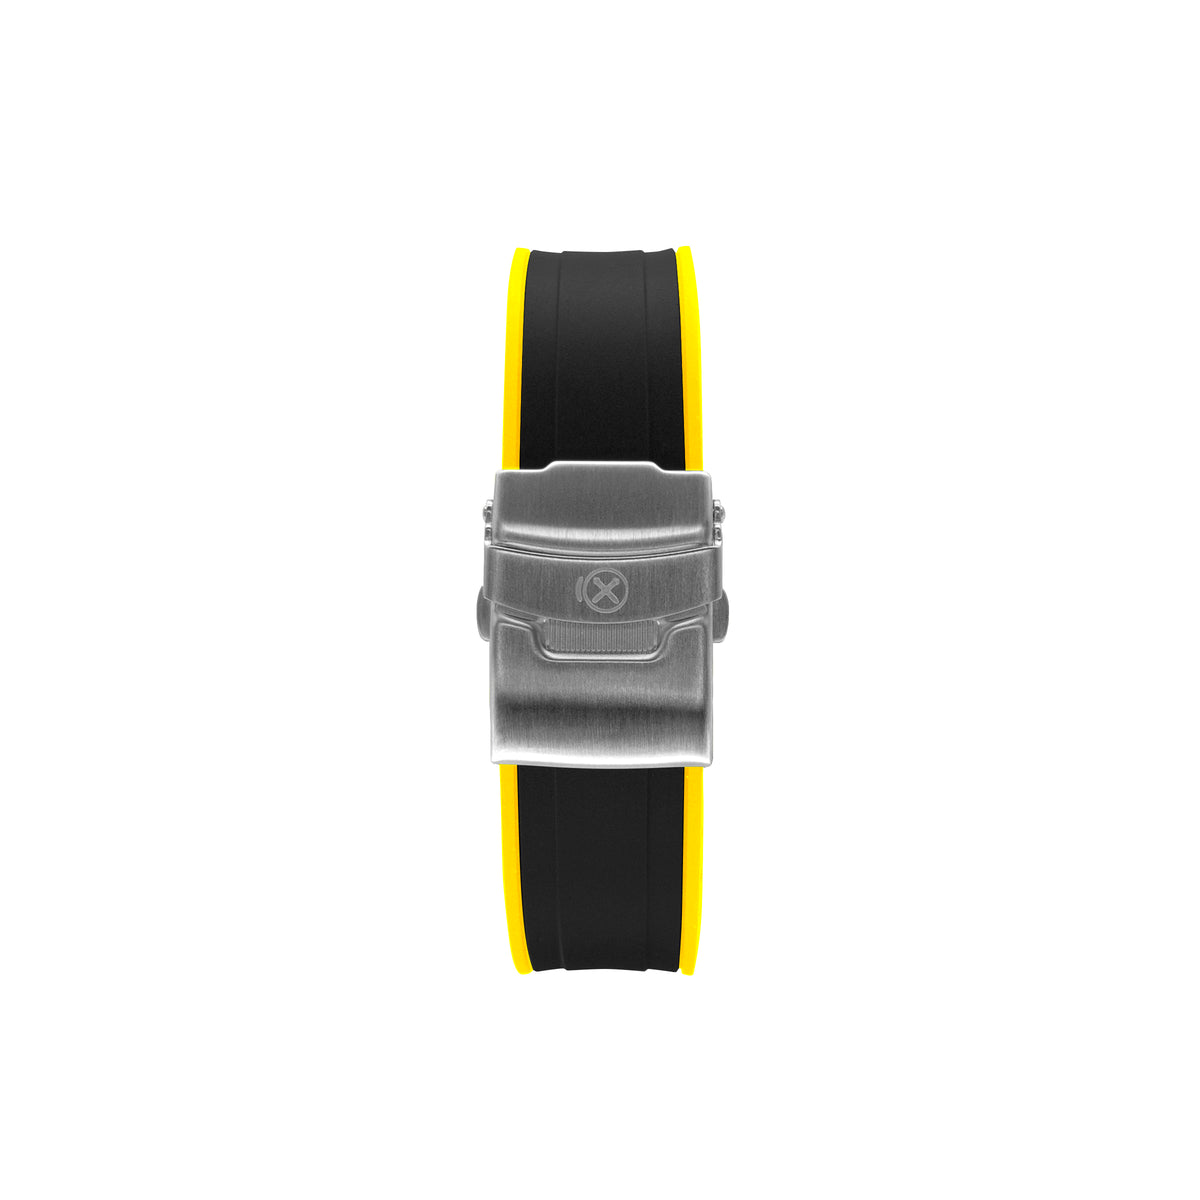 StrapXPro Curved End Rubber Strap for Seiko SKX/5KX in Black/Yellow (22mm) - Nomad Watch Works SG